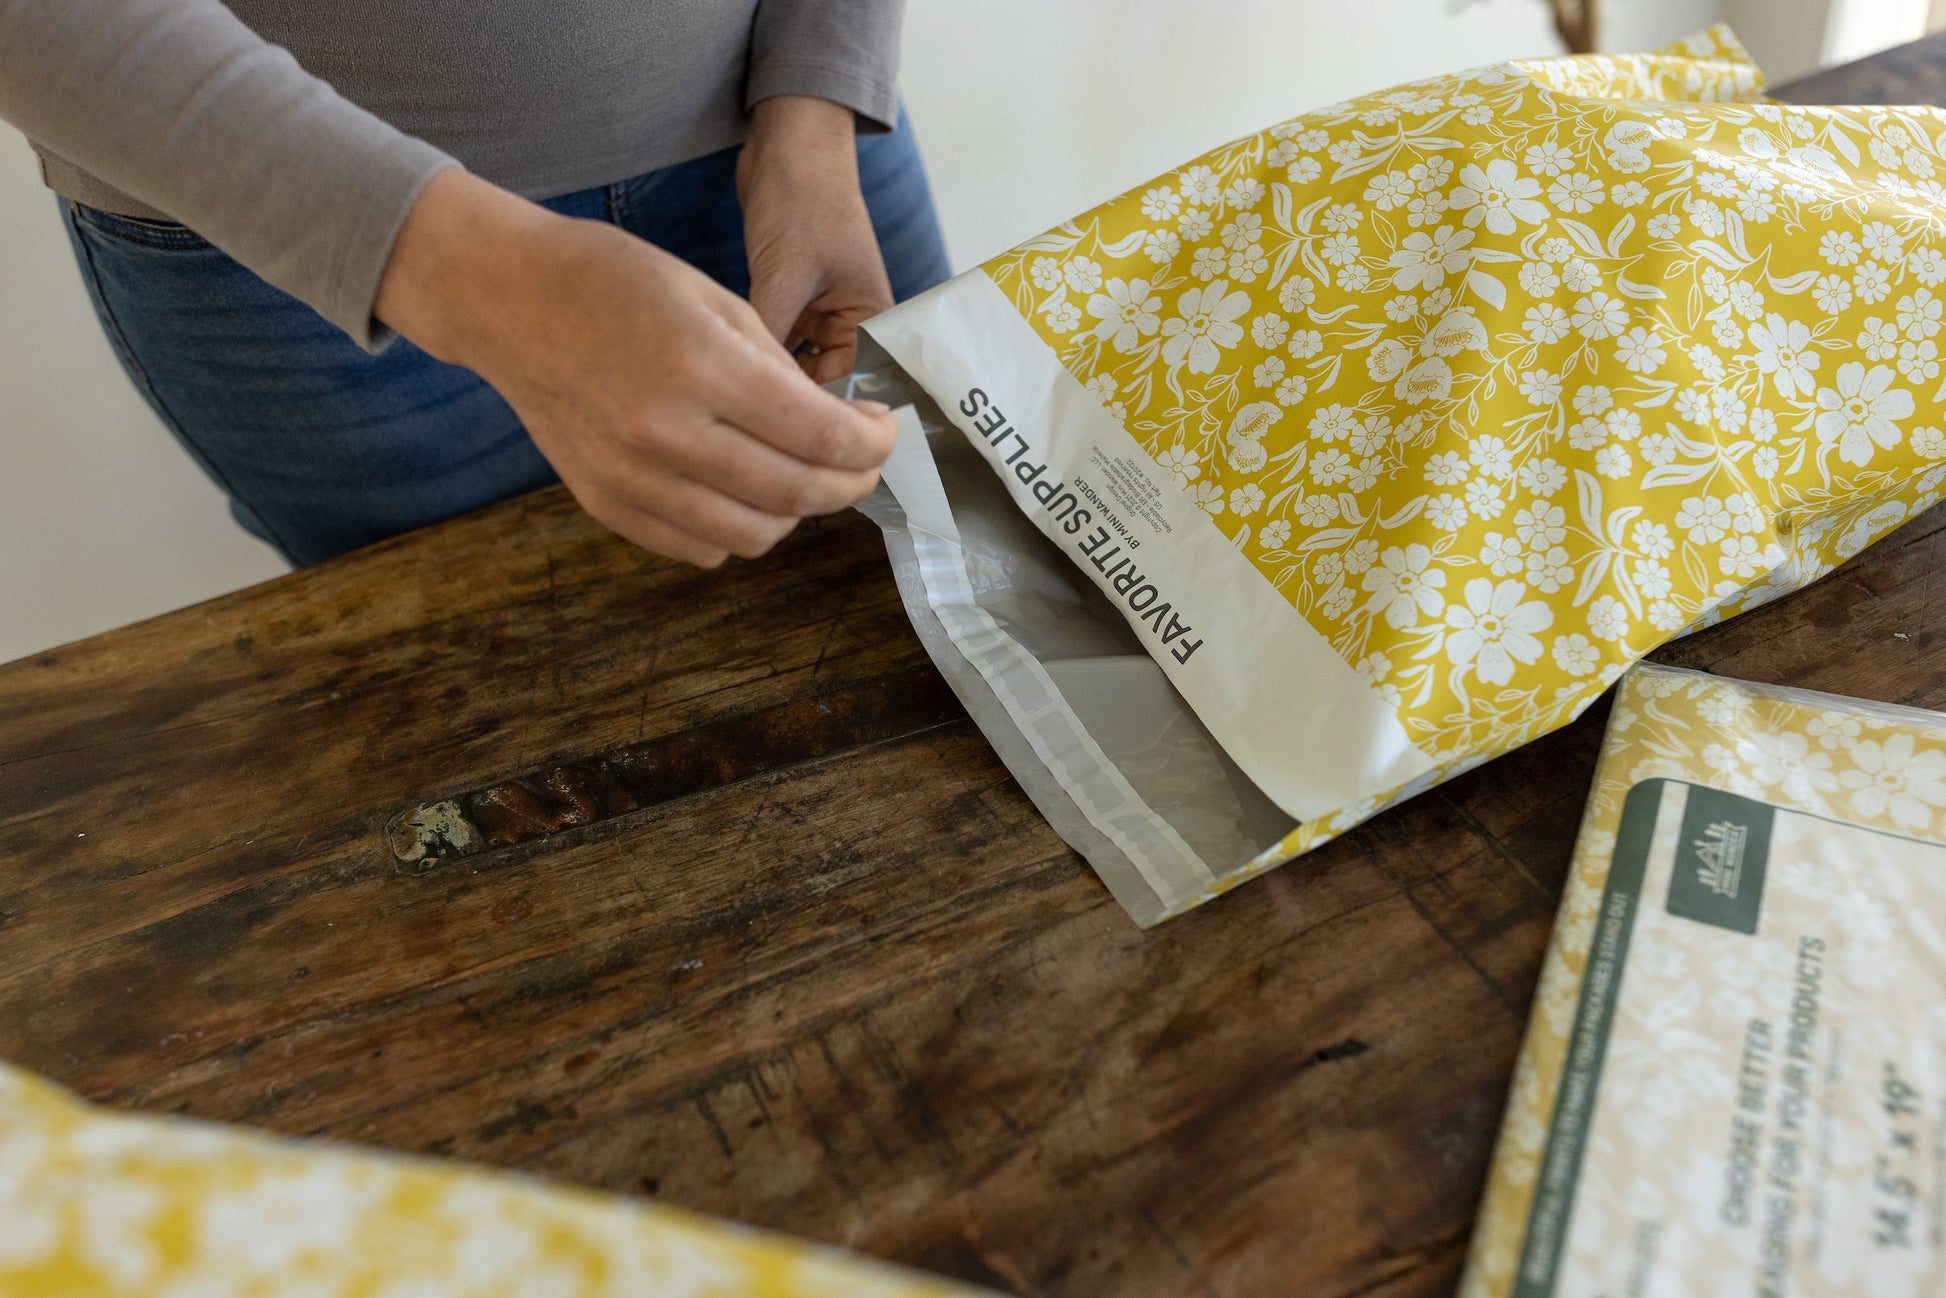 The process of fulfilling orders. A small business owner is using a quick peel and seal adhesive to package a parcel. Using fun yellow flowery polymailer bags.